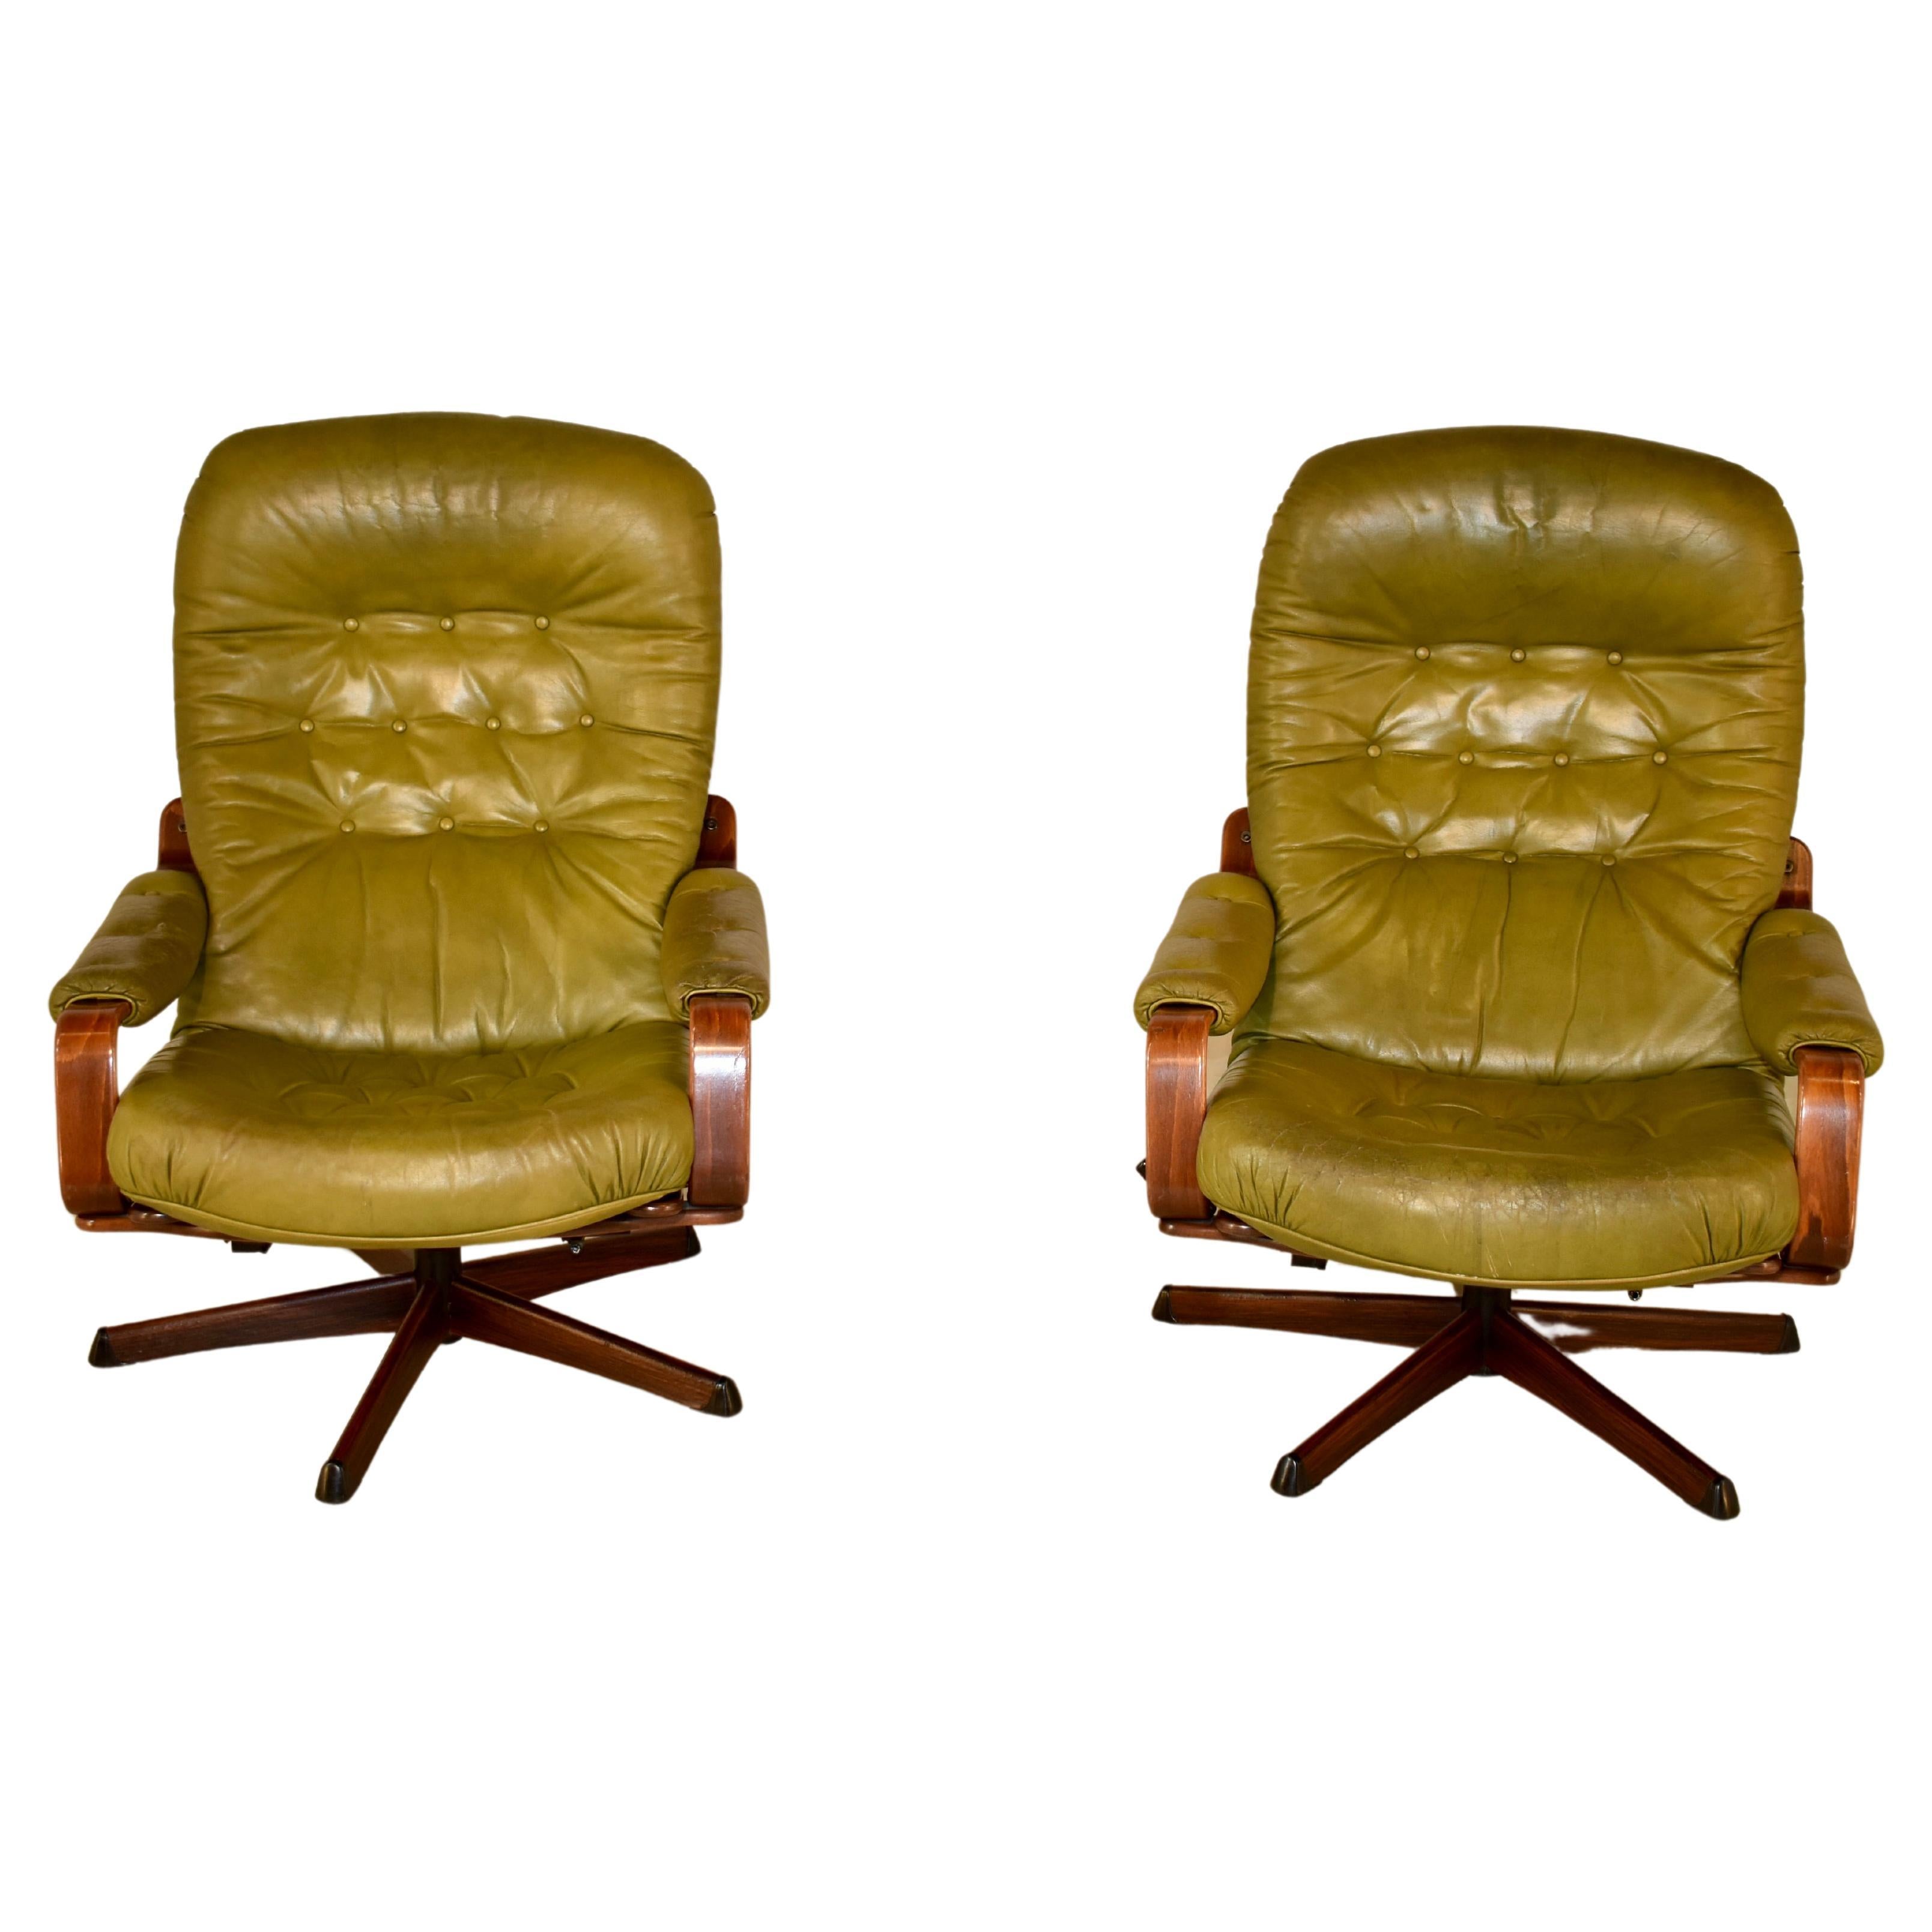 Pair of Göte Mobler Mid-Century Leather Chairs, circa 1960s